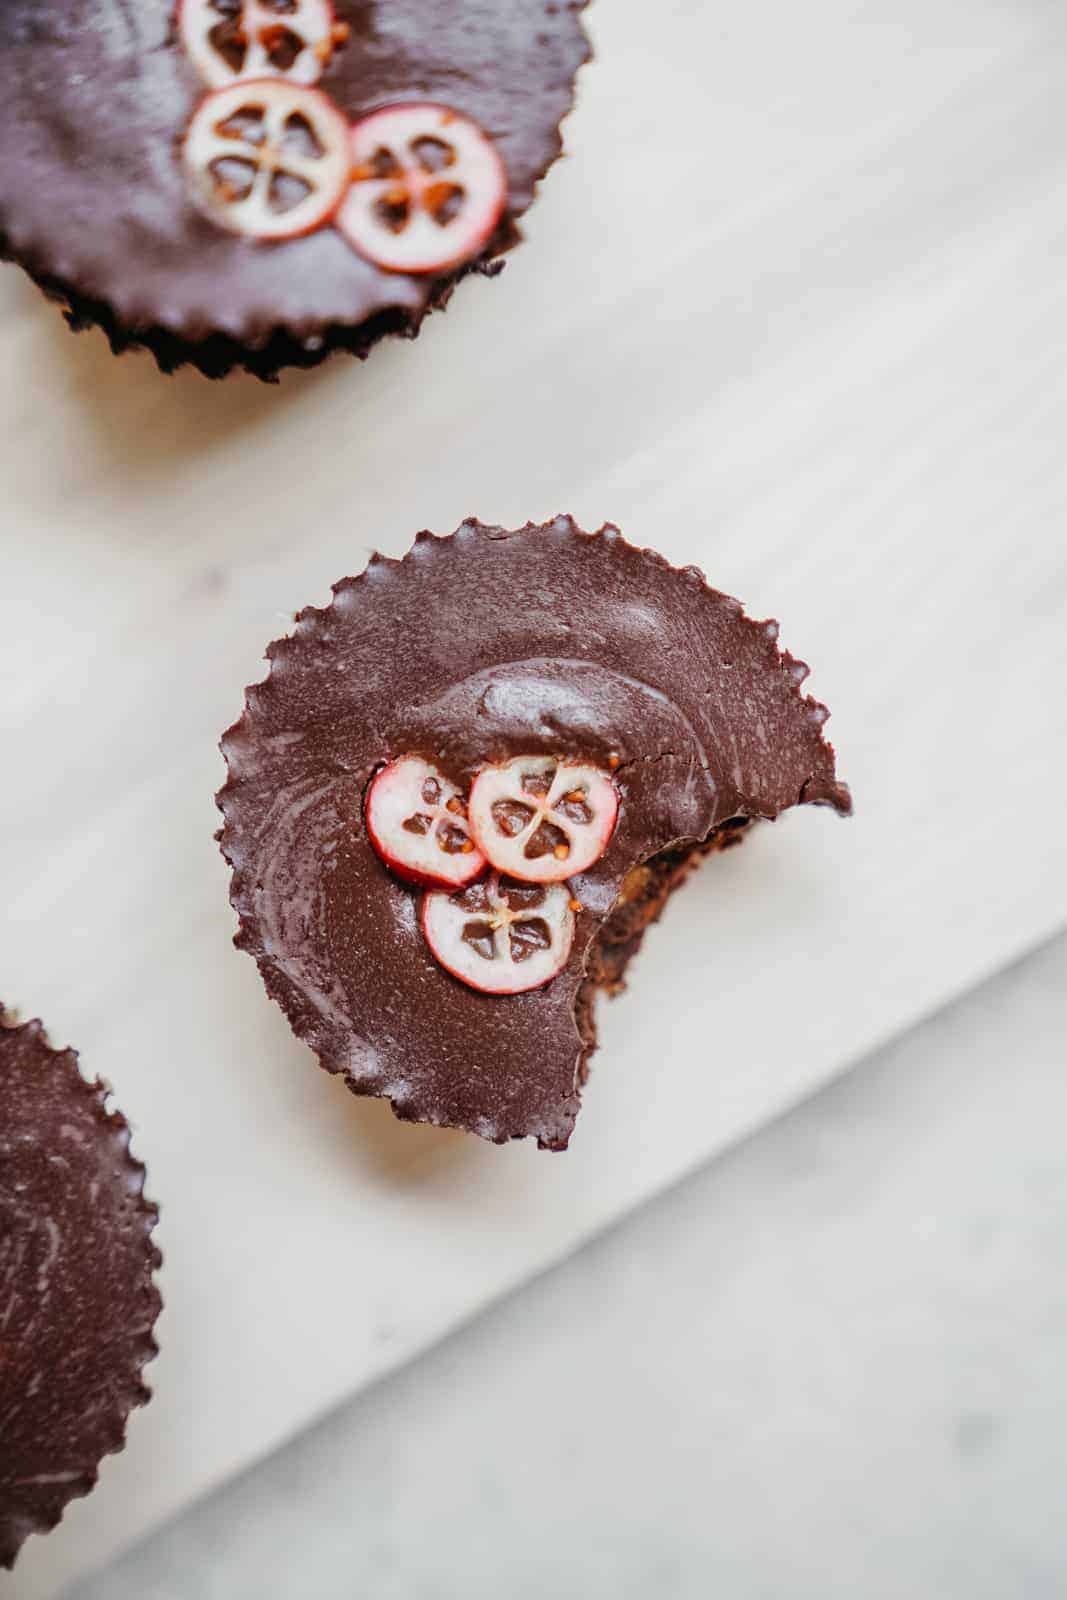 Yummy Hazelnut Caramel Chocolate Cups with a bite out of it sitting on white counter. A go-to quick vegan meal idea.